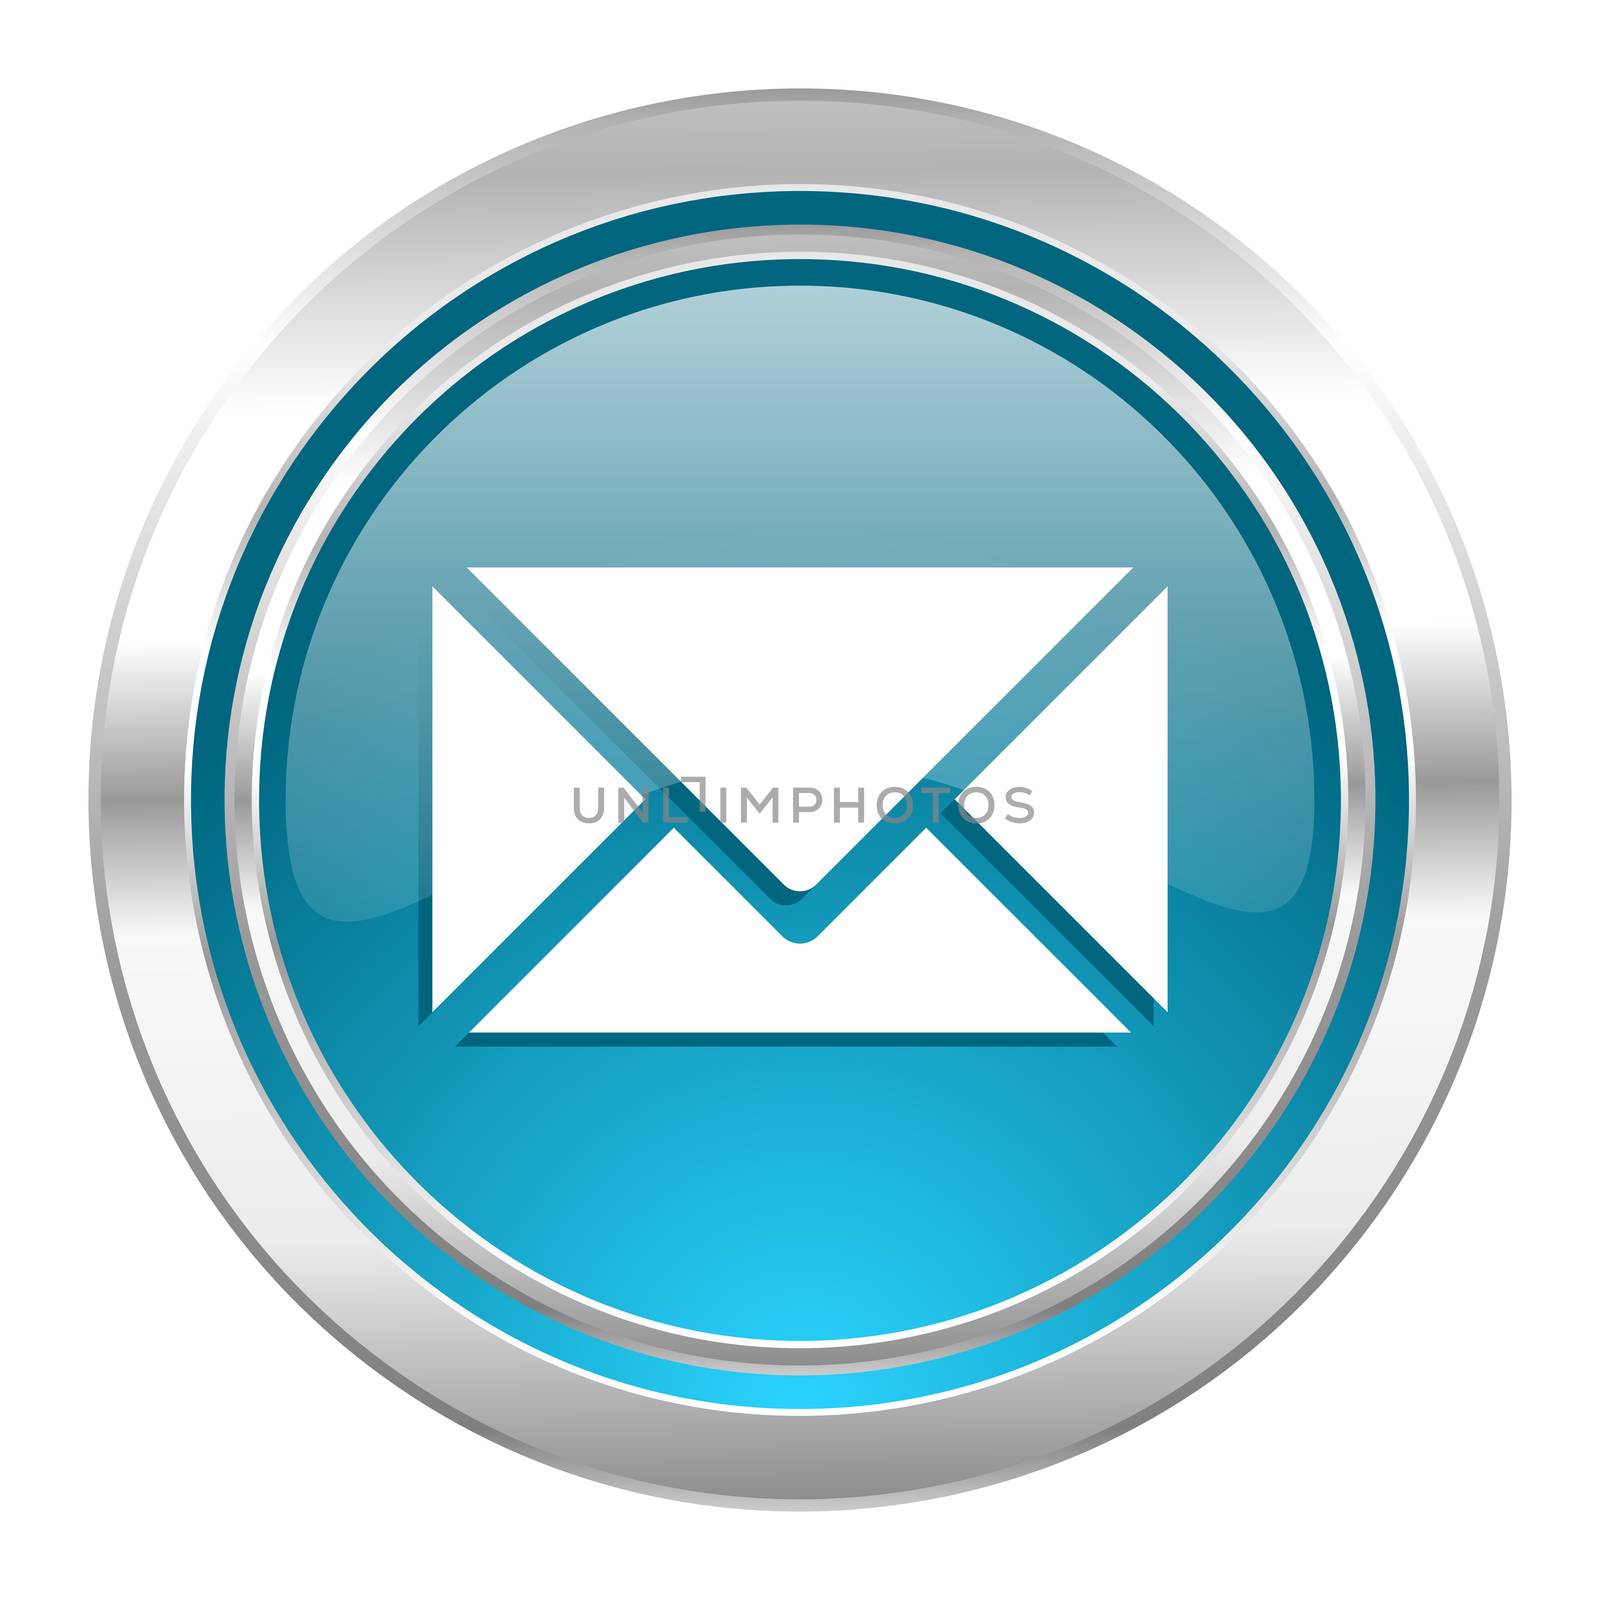 email icon, post sign by alexwhite